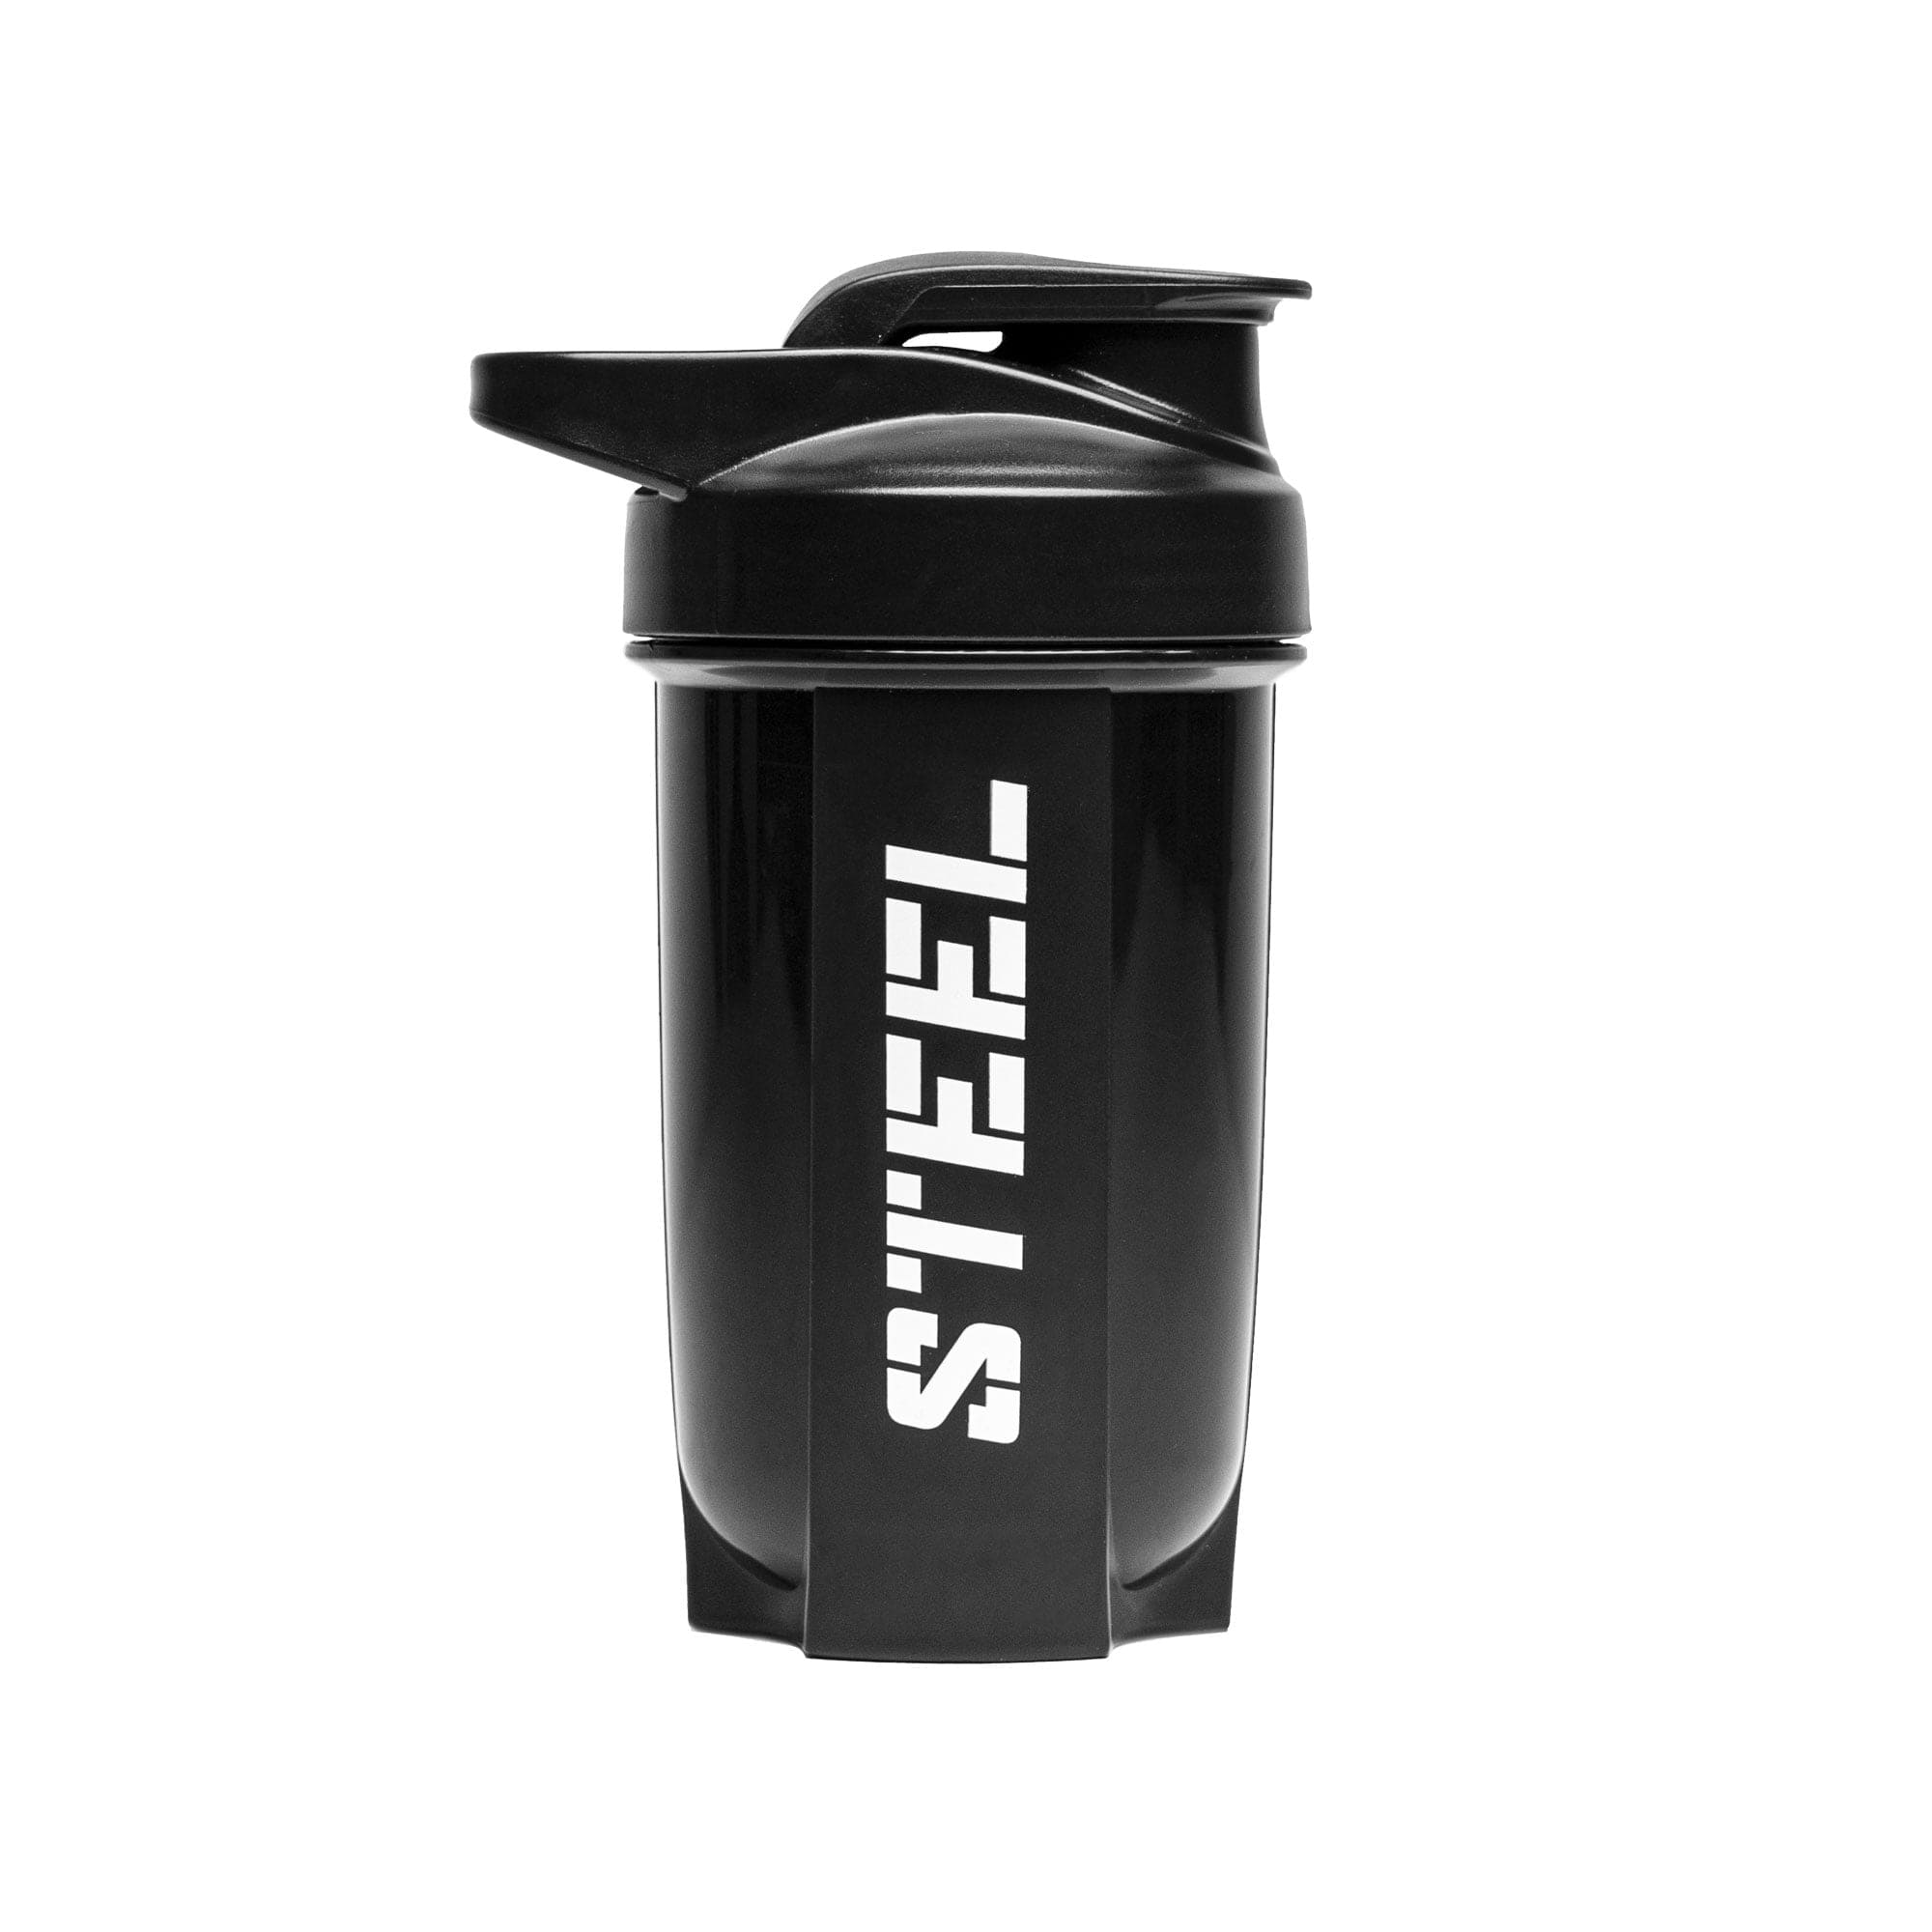 Pre-Workout Bundle with T-Shirt - Steel Supplements